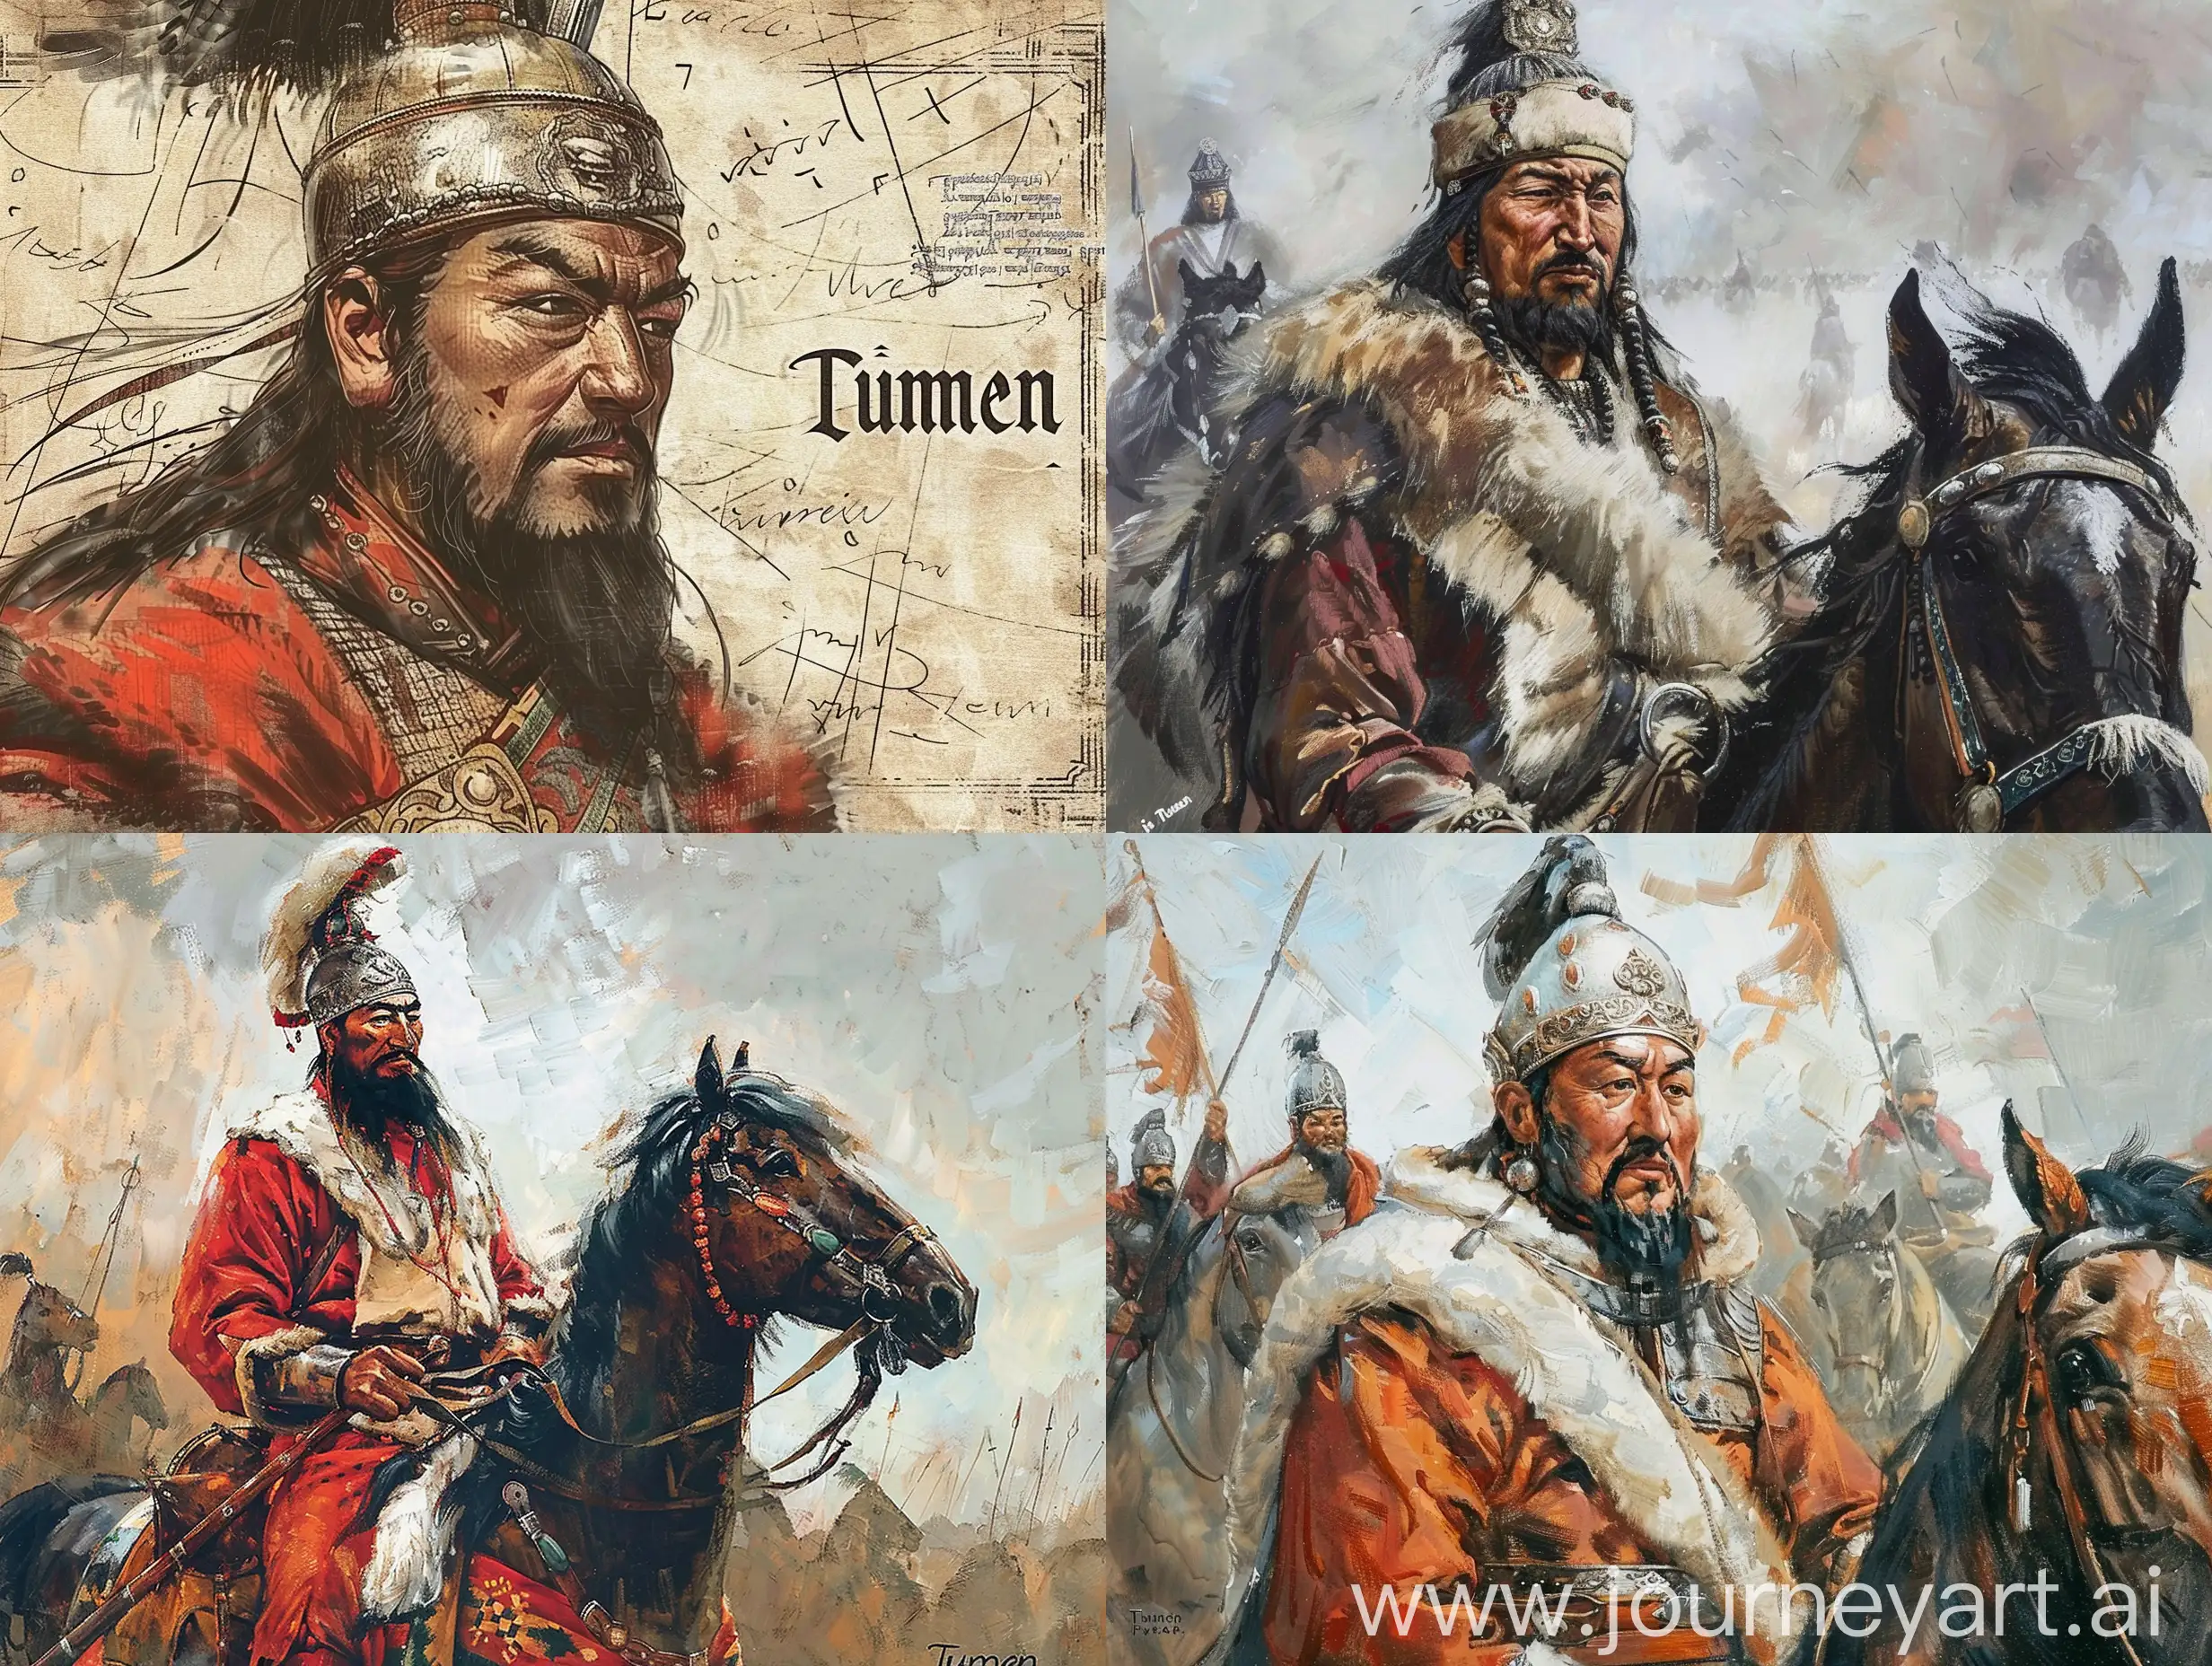 Bumin-Khan-Founder-of-the-Turkic-Khaganate-and-Chief-of-the-Turks